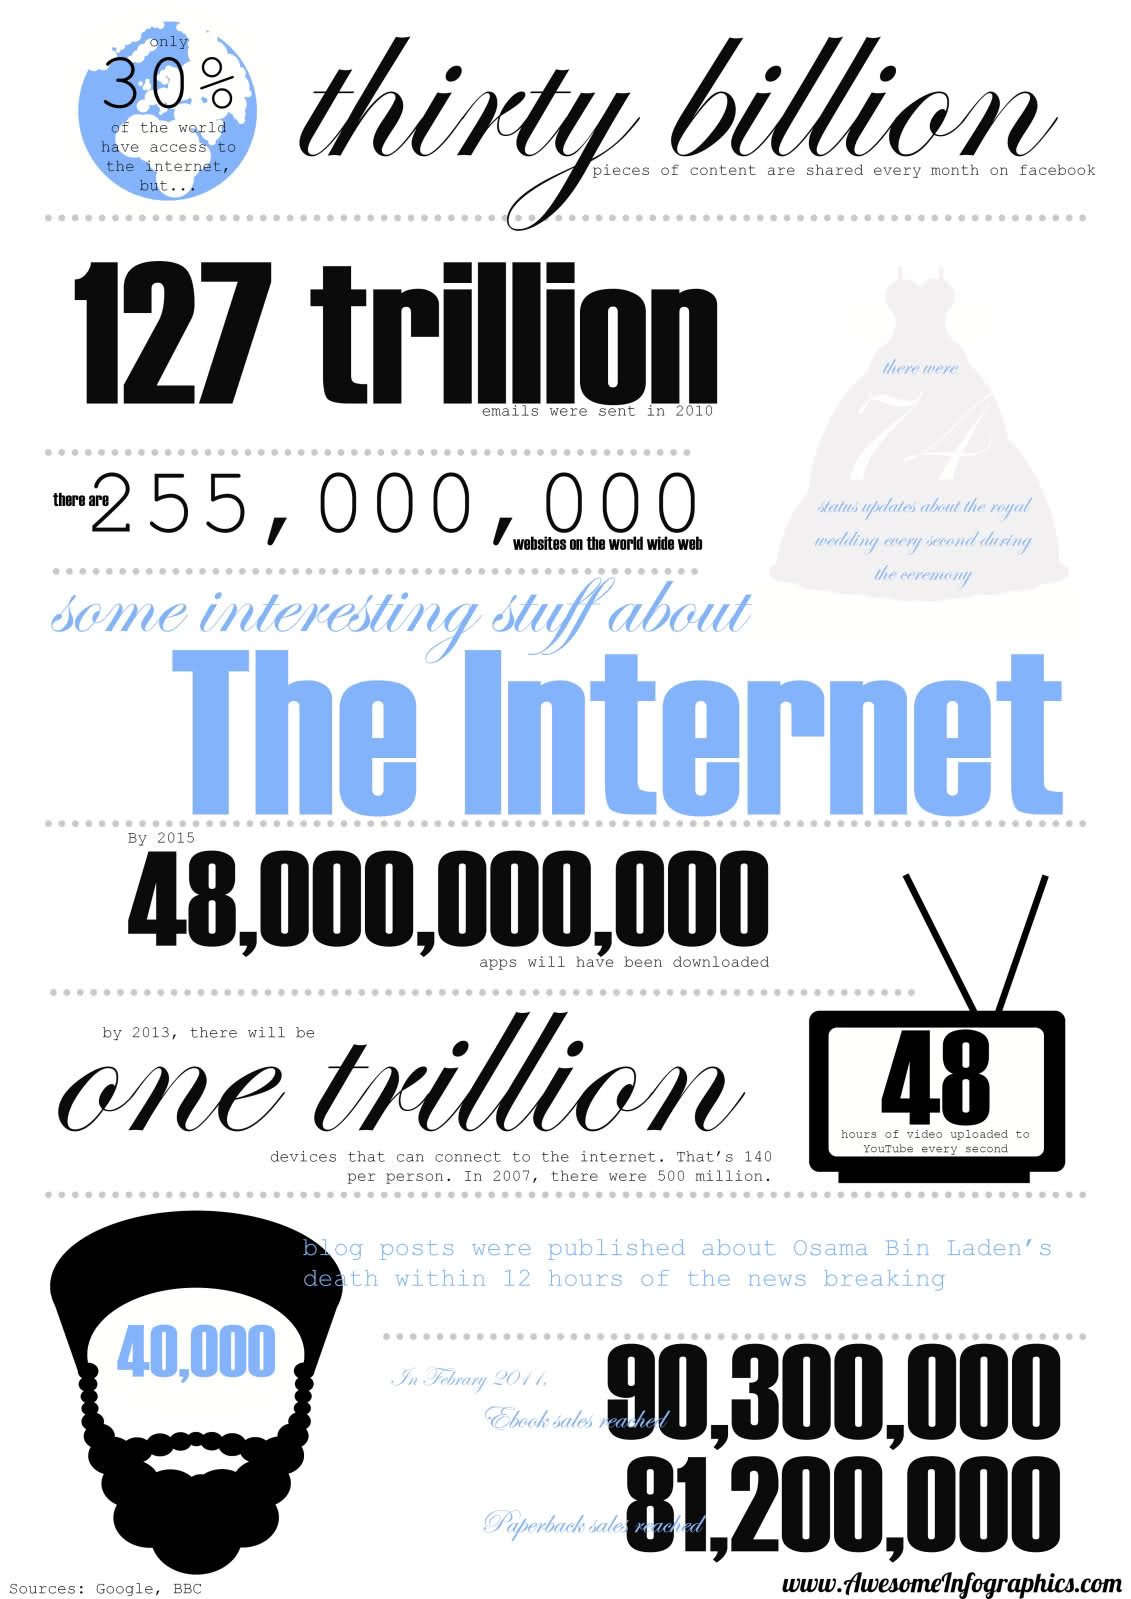 interesting stuff about the internet